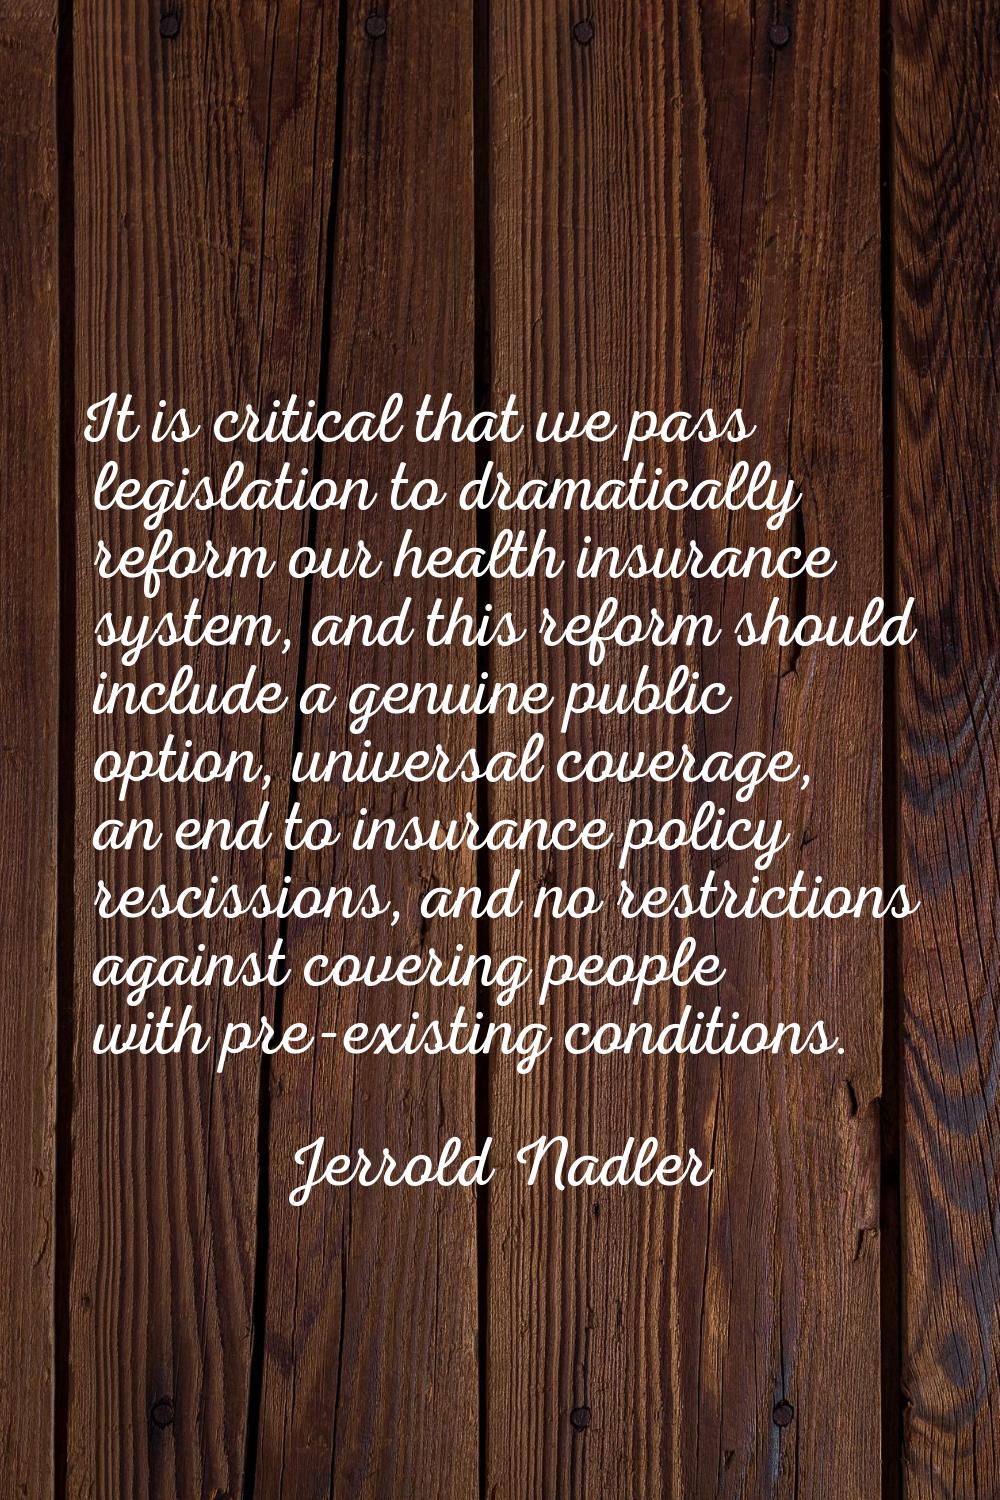 It is critical that we pass legislation to dramatically reform our health insurance system, and thi